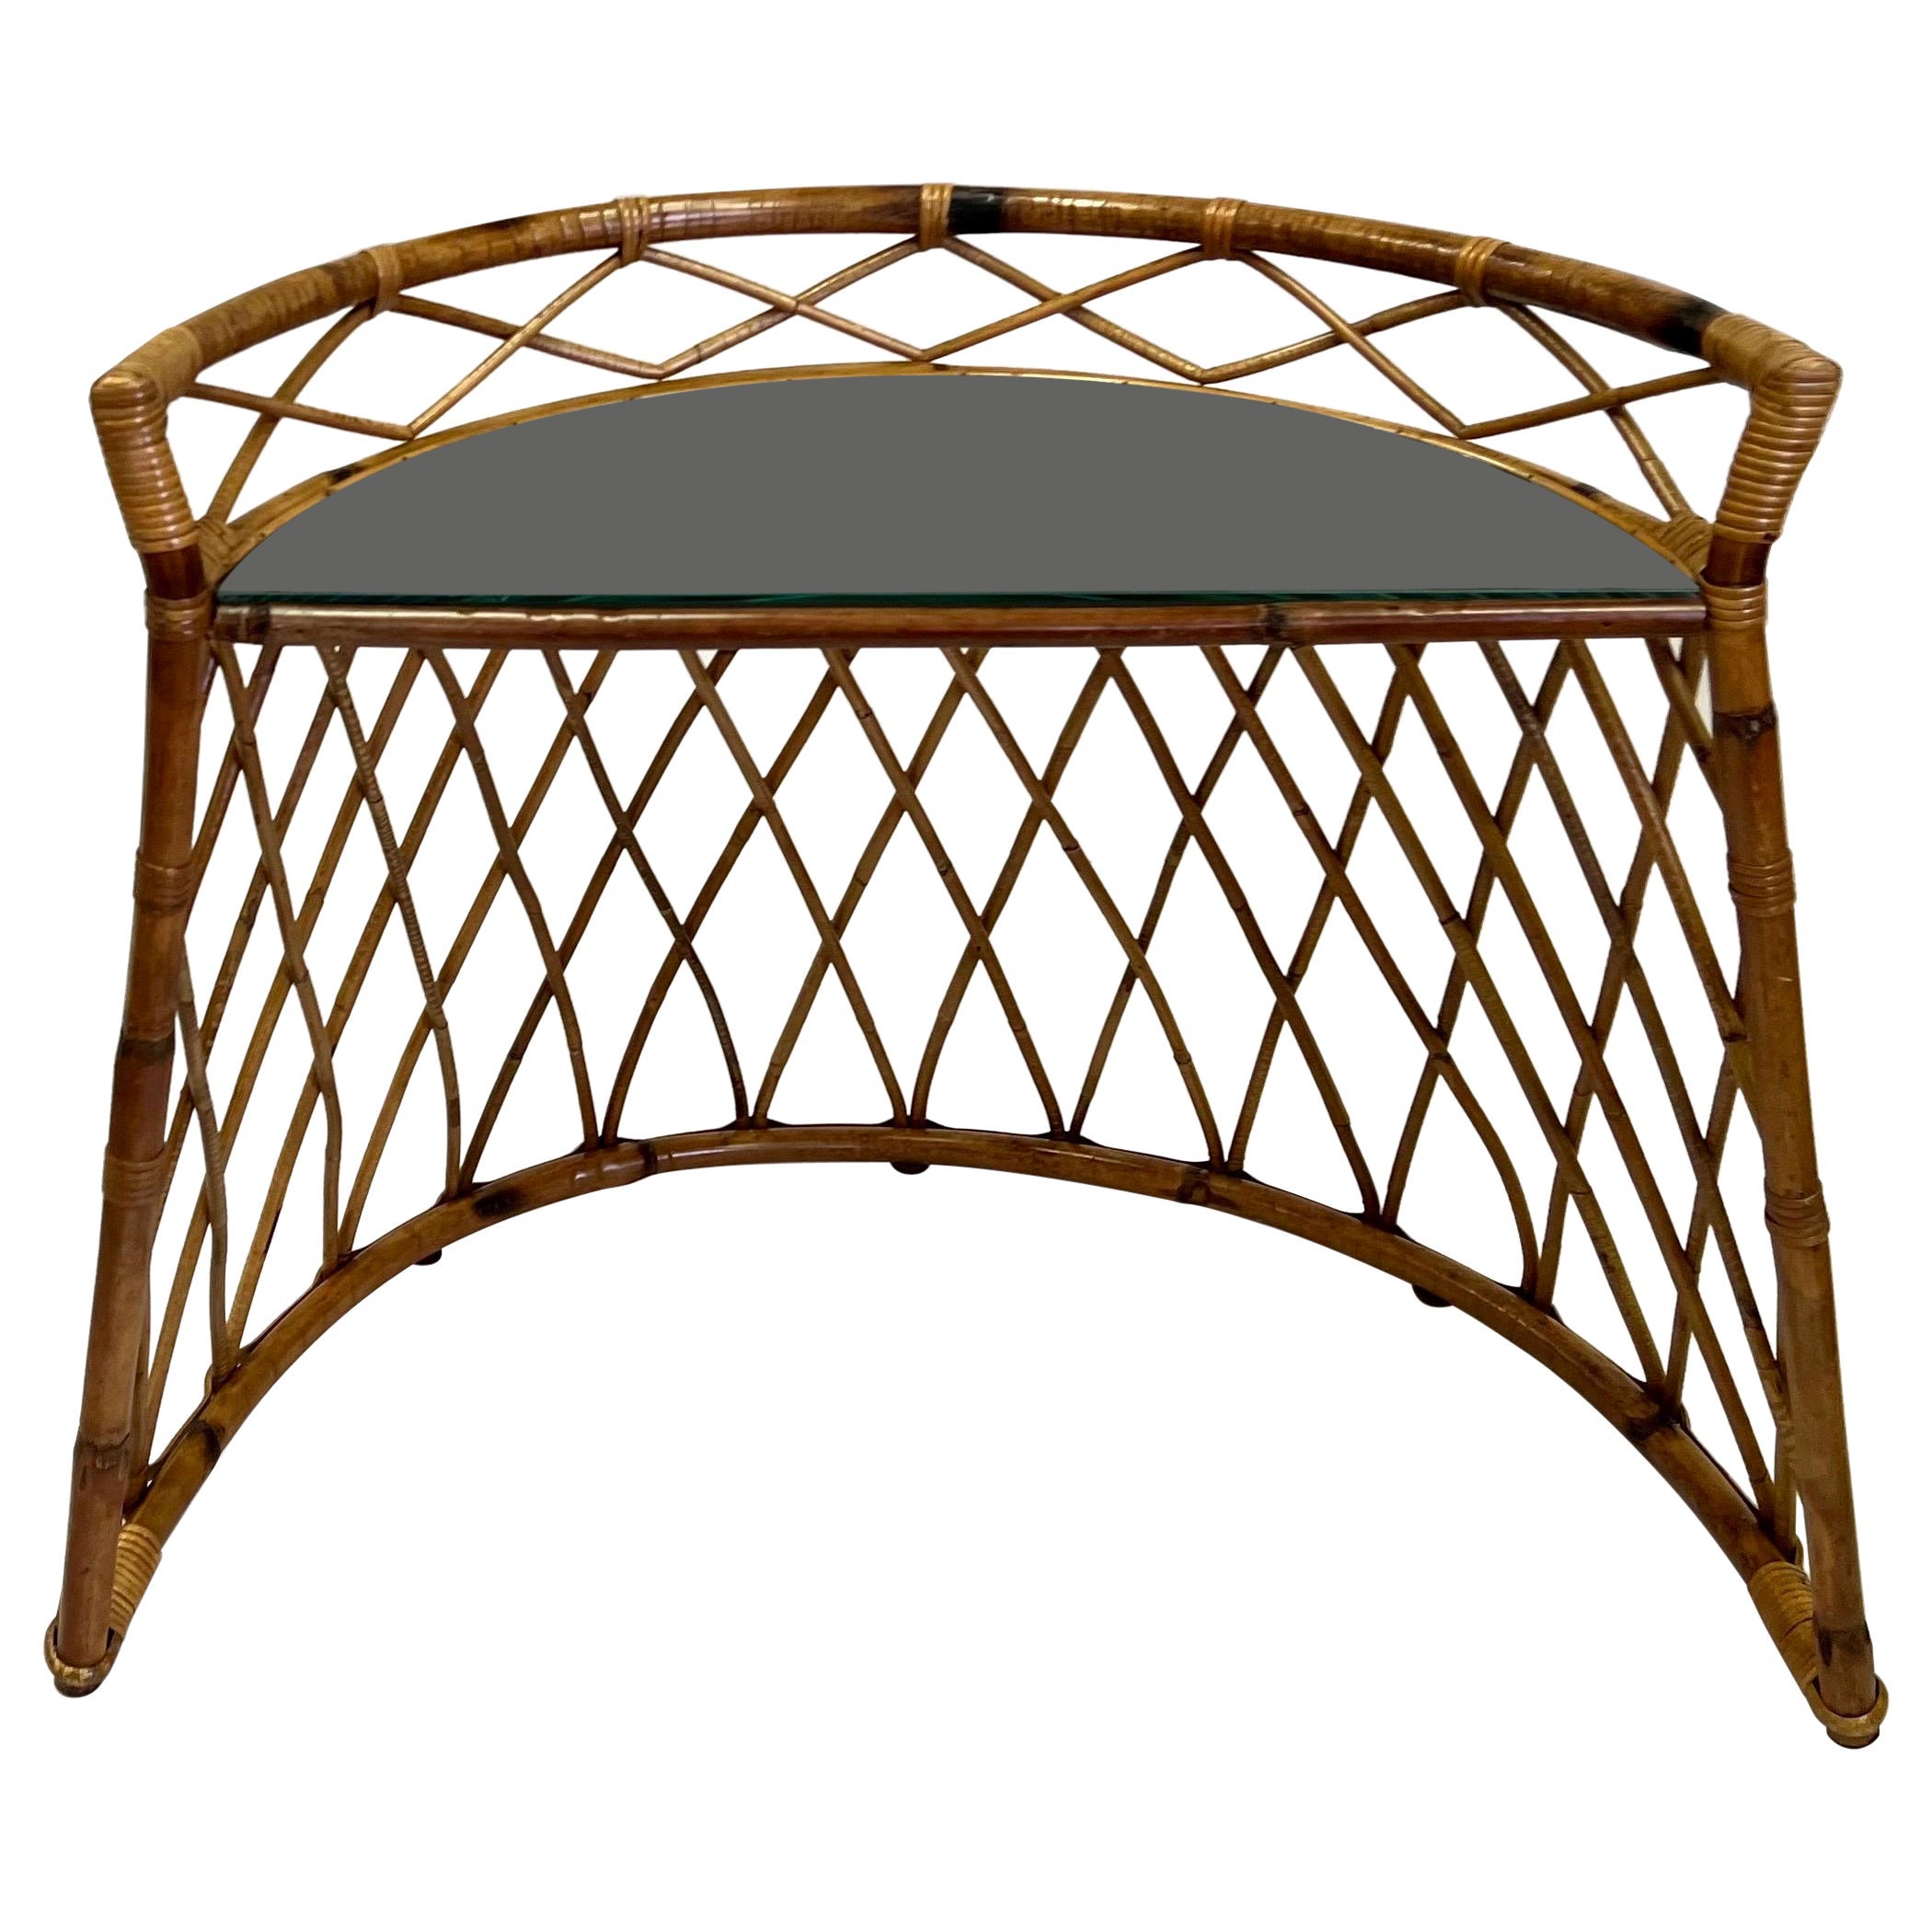 French Mid-century Modern Neoclassical Bamboo Rattan Console or Desk For Sale